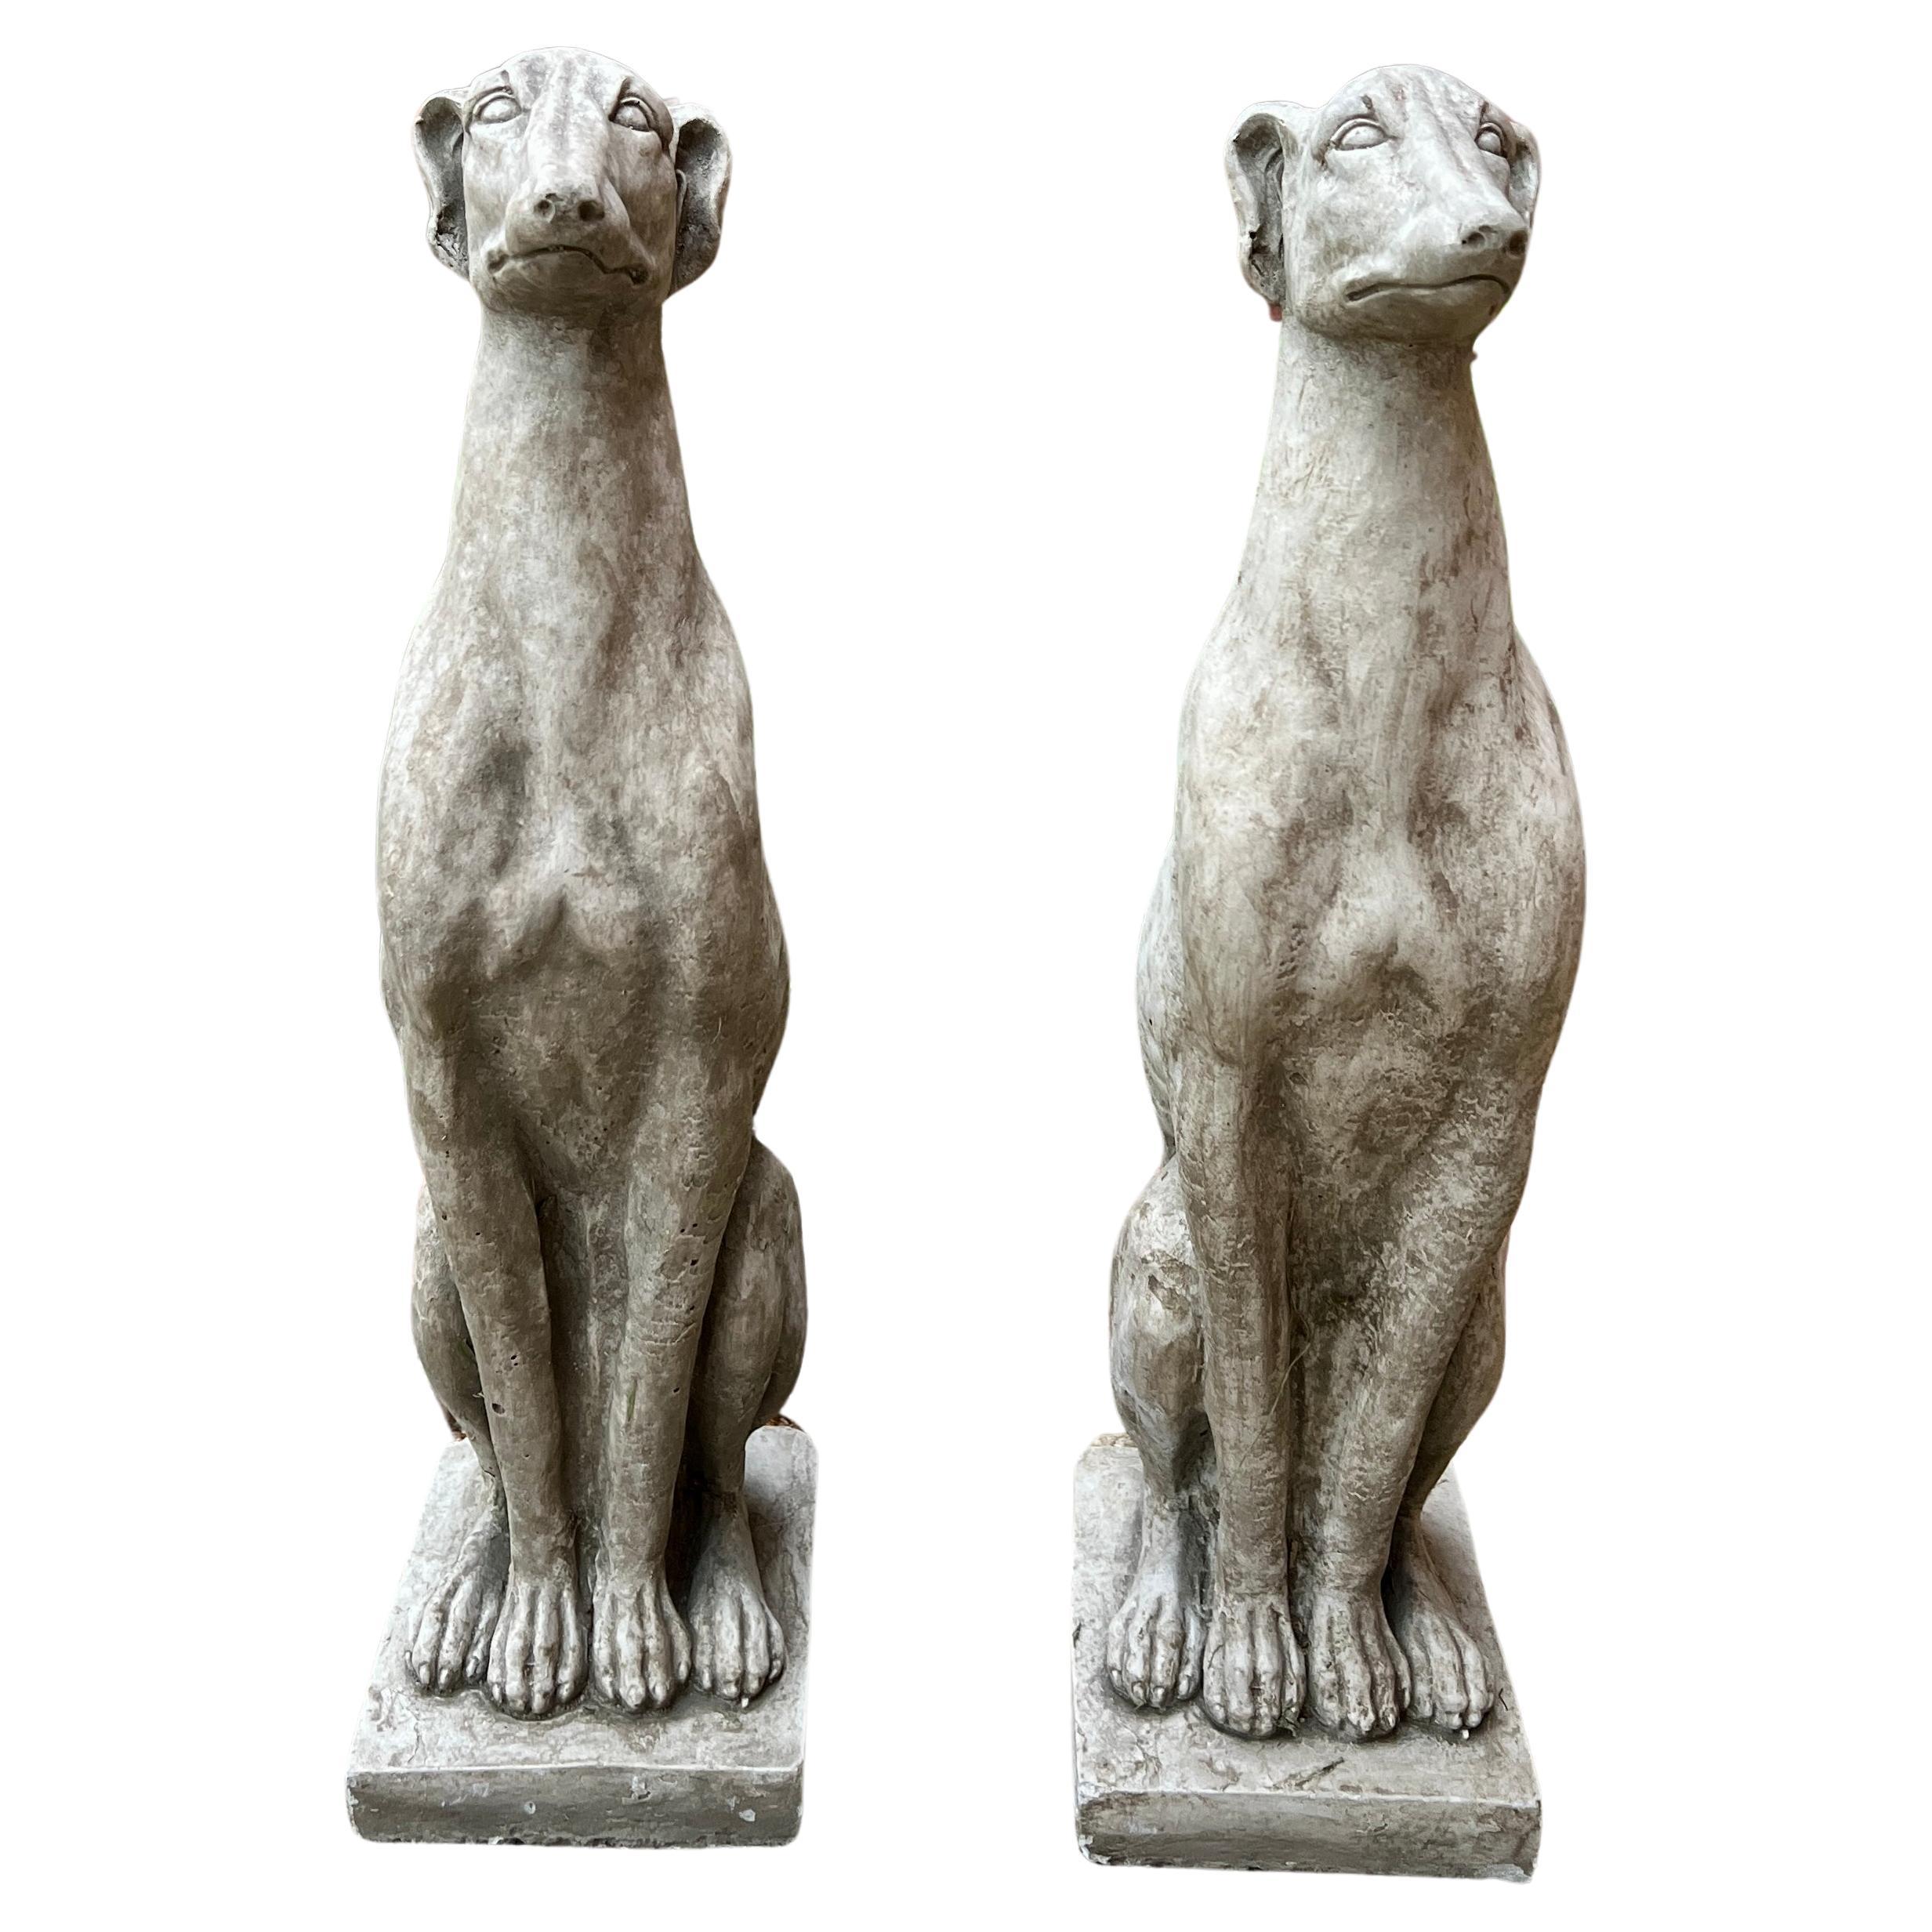 Vintage English Statues DOGS PAIR Garden Figures Cast Stone Yard Decor 22" Tall For Sale